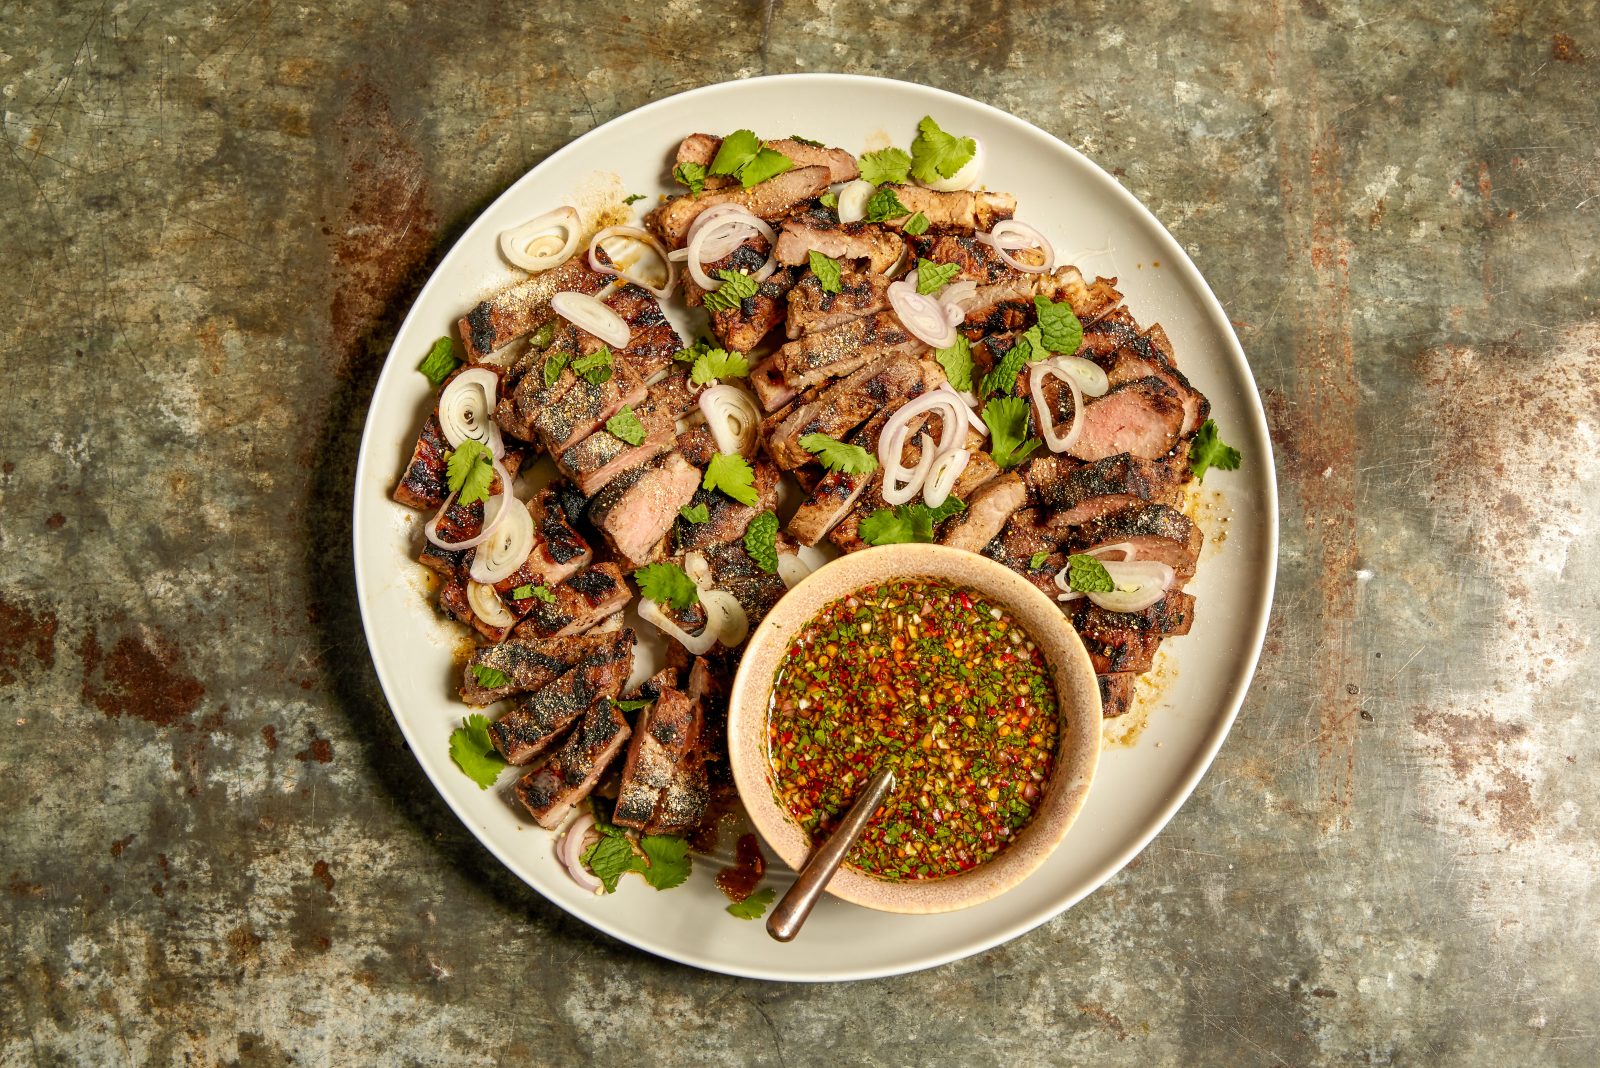 Thai Grilled Pork Moo Ping Chili Lime Dipping Sauce